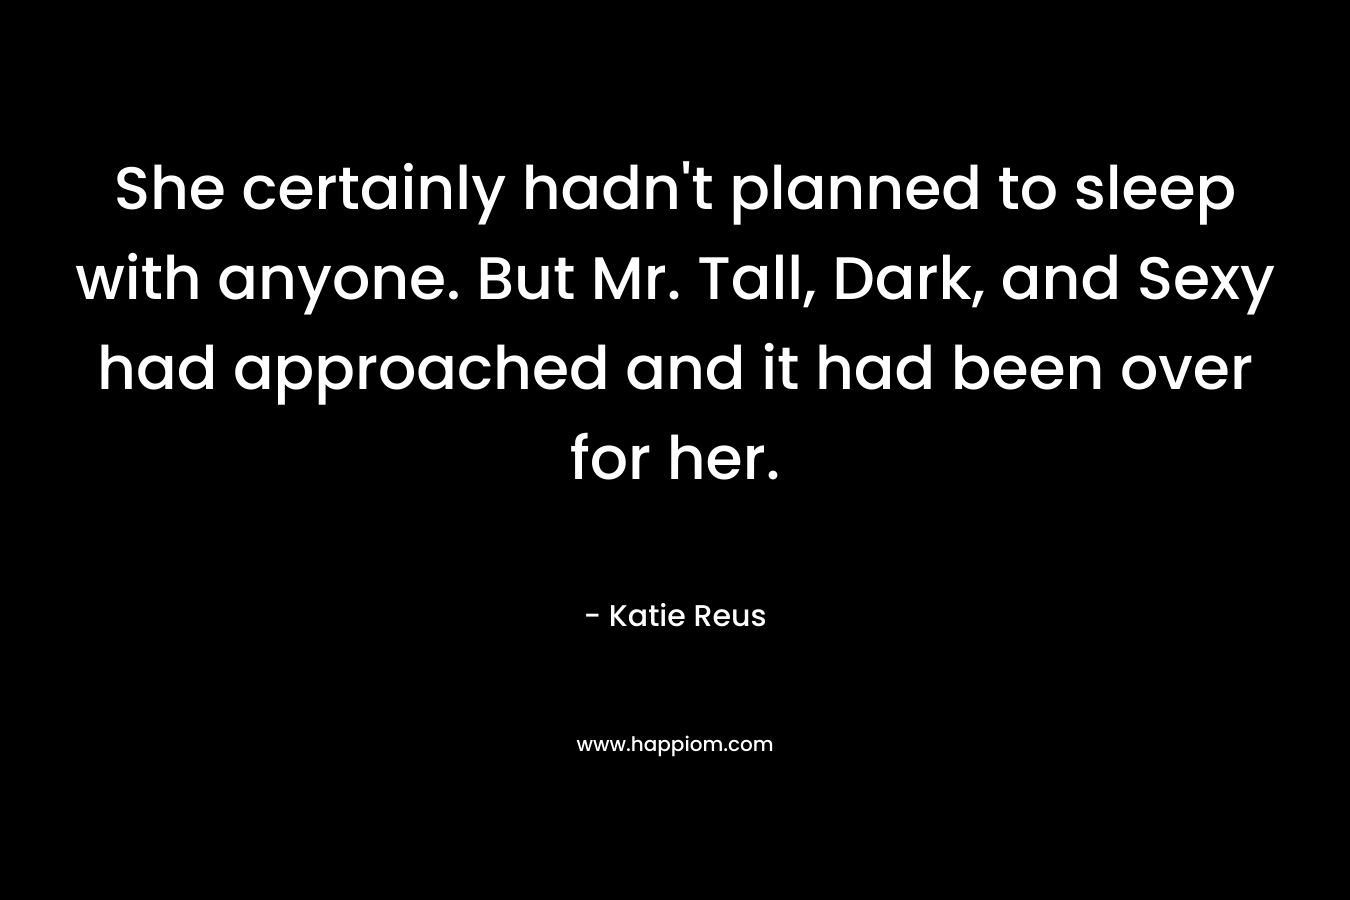 She certainly hadn’t planned to sleep with anyone. But Mr. Tall, Dark, and Sexy had approached and it had been over for her. – Katie Reus